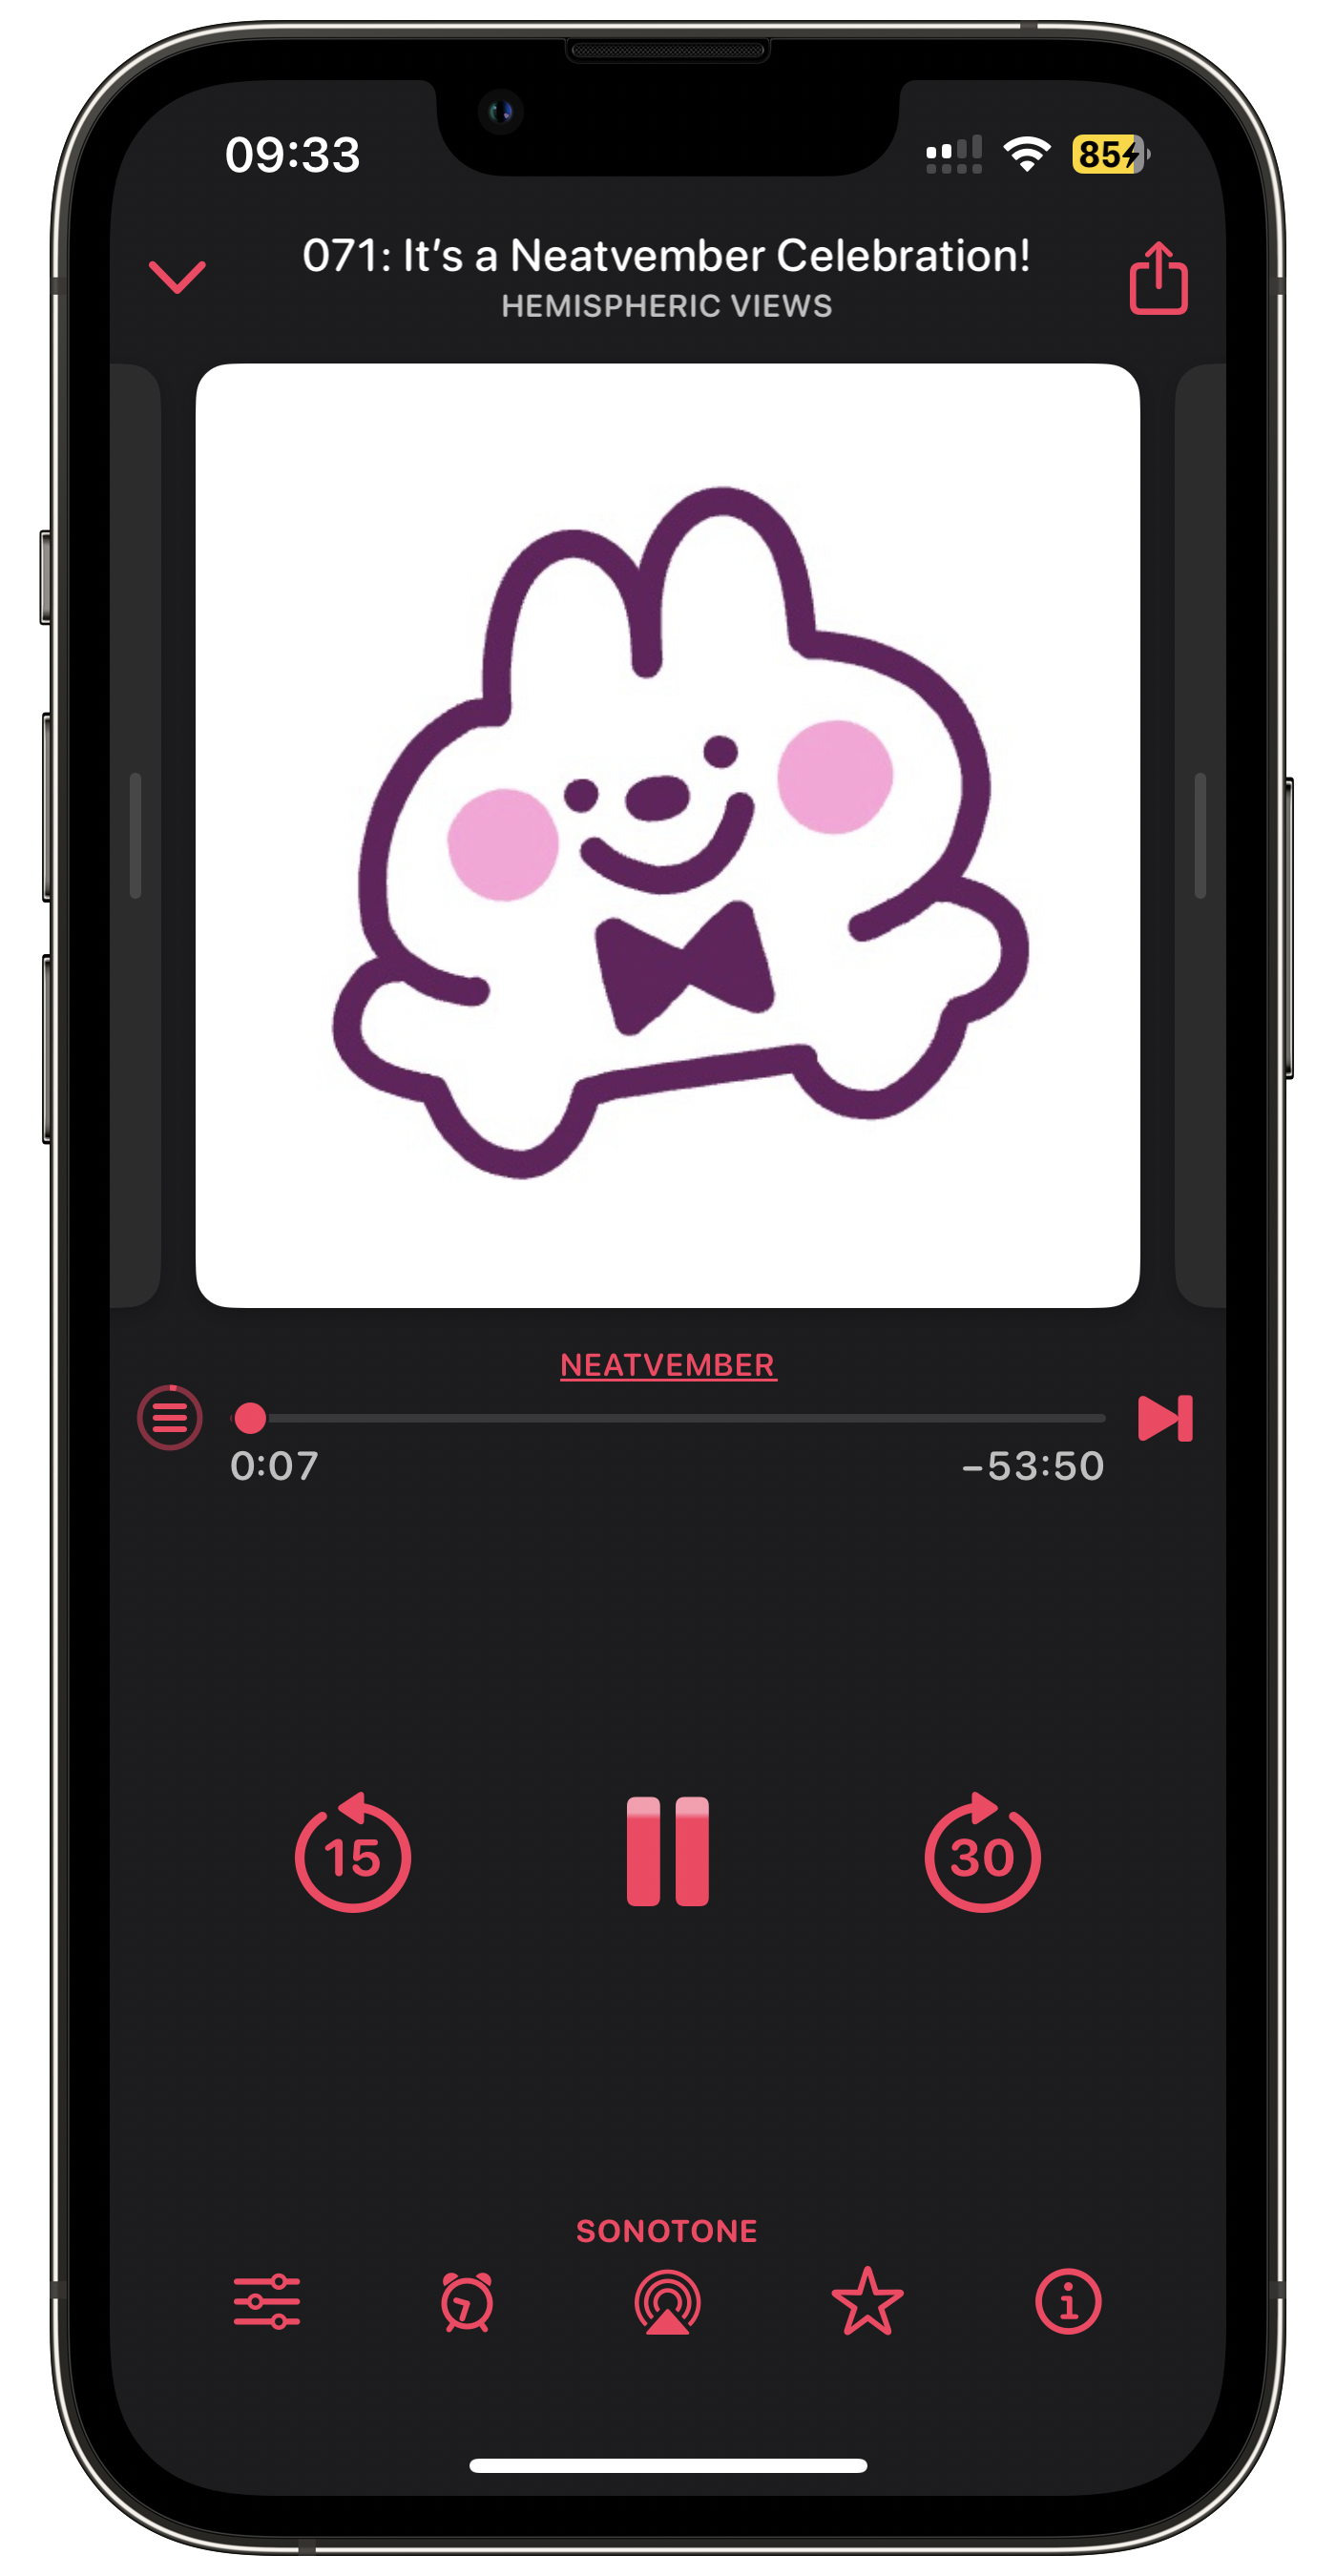 screenshot of a podcast player with a cute doodle as album art